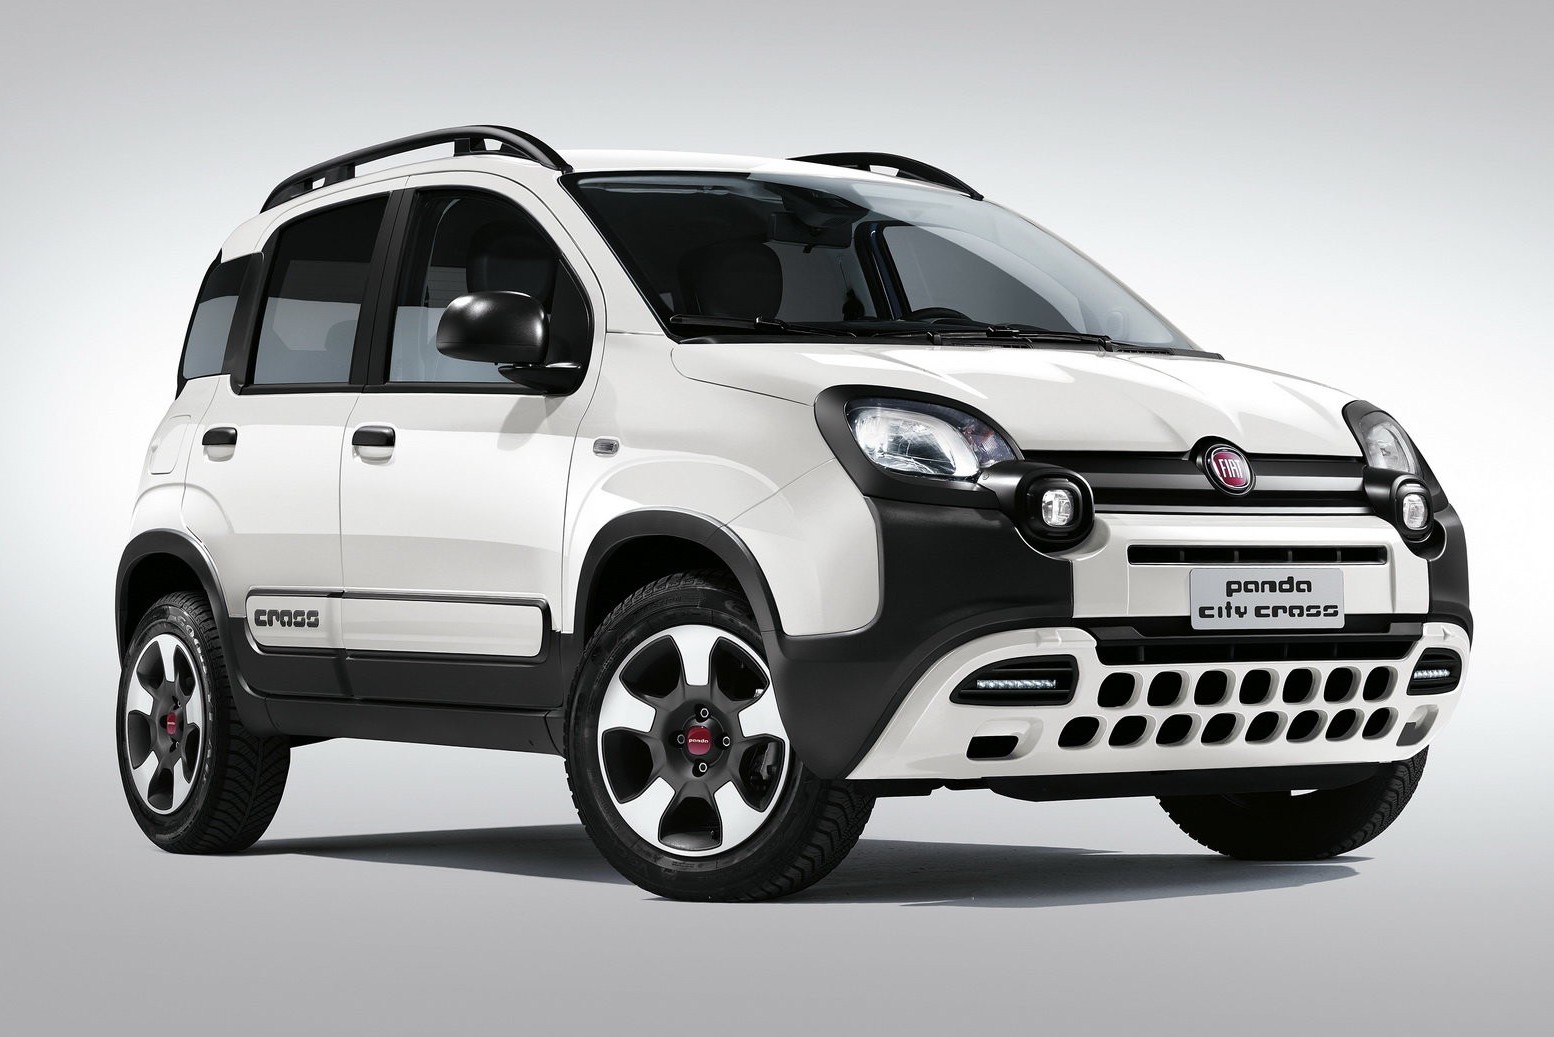 The new 2022 Fiat Panda City Cross, the city car that is geared towards SUV and also suitable for out-of-town